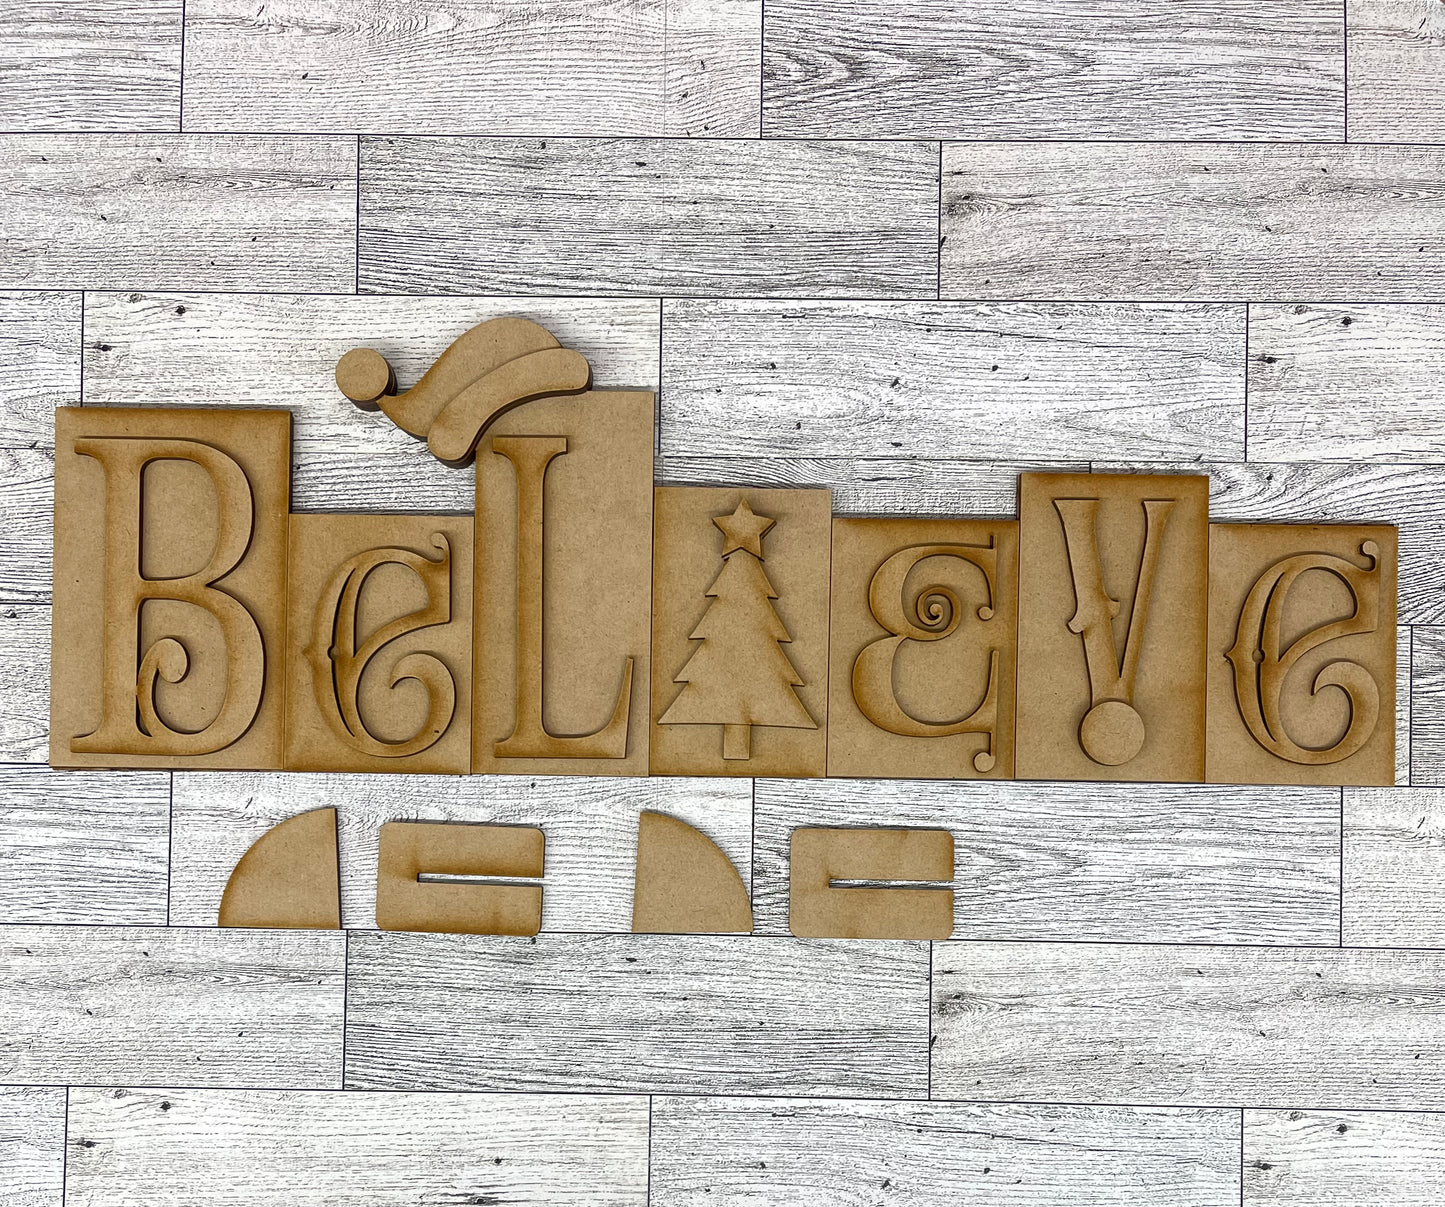 Believe word kit - wood pieces, unpainted wood cutouts, ready for you to paint, scrapbook paper is not included